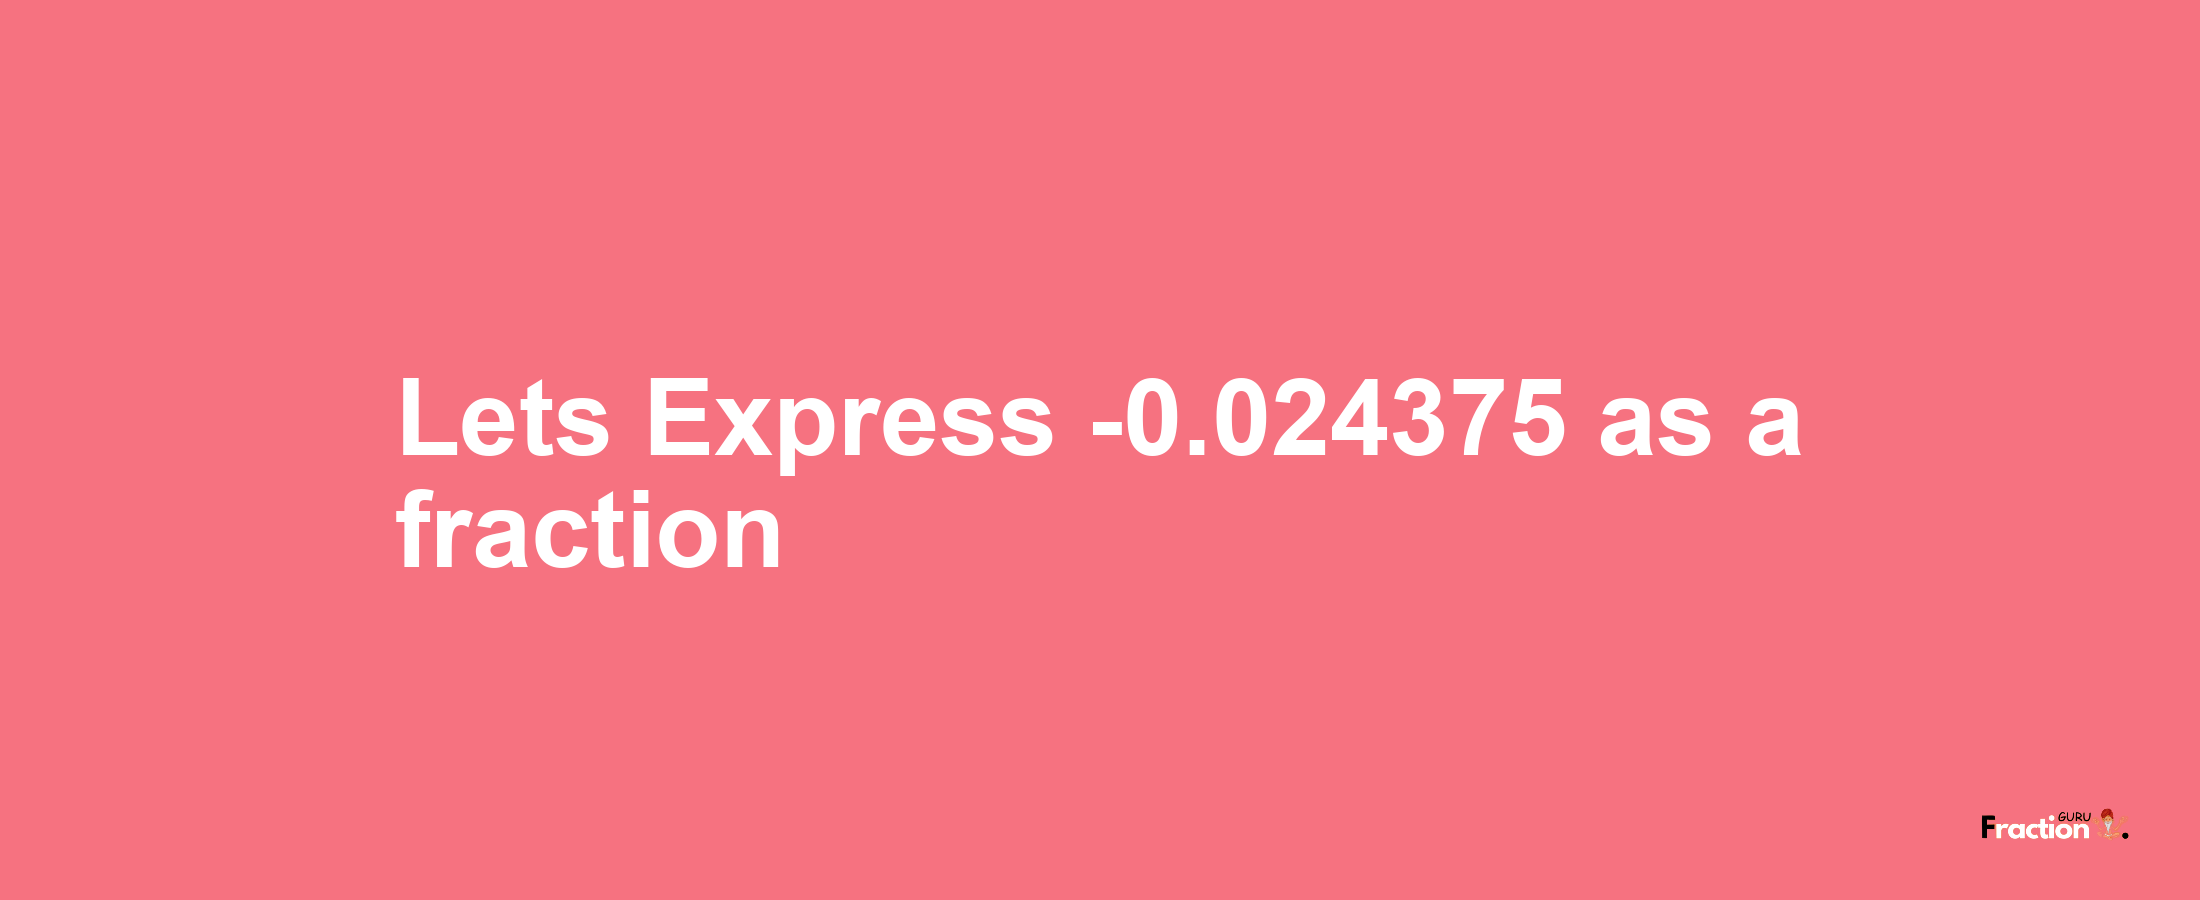 Lets Express -0.024375 as afraction